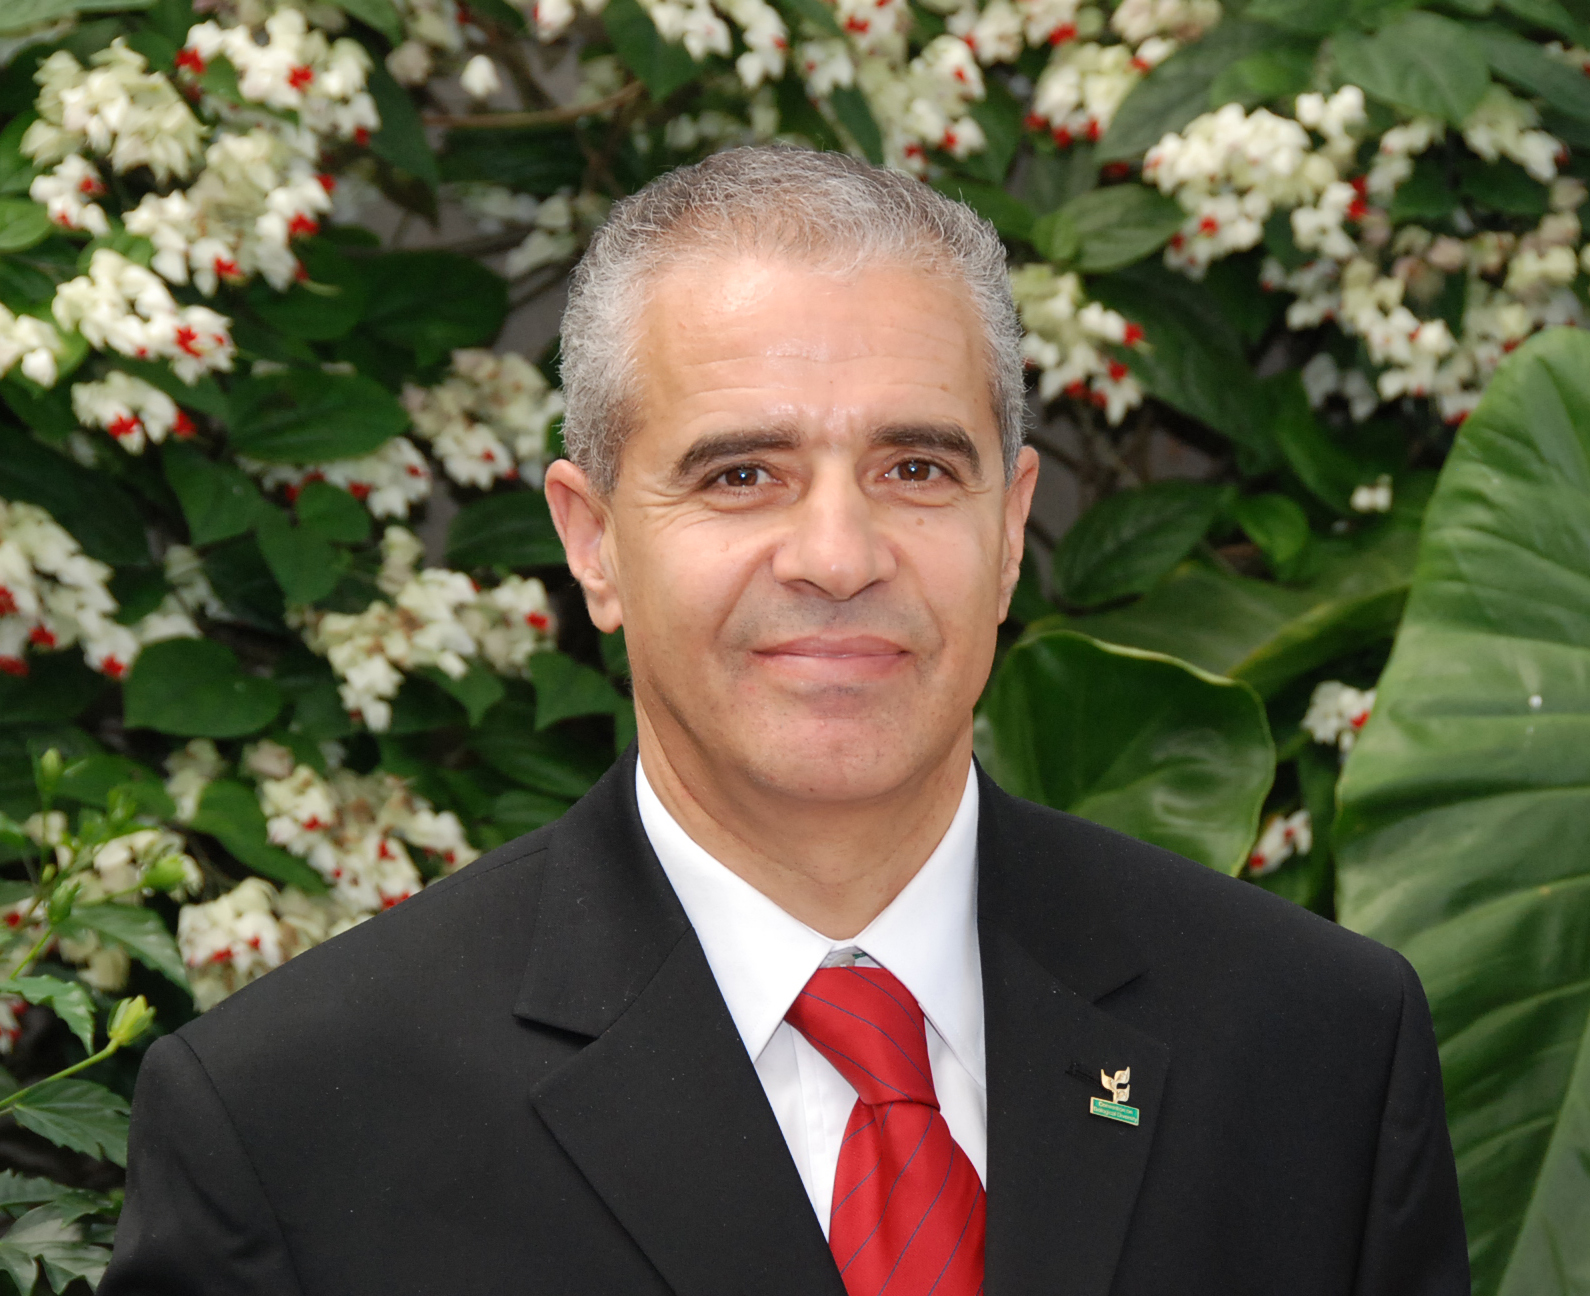 Ahmed Djoghlaf, Executive Secretary of the Convention on Biological Diversity